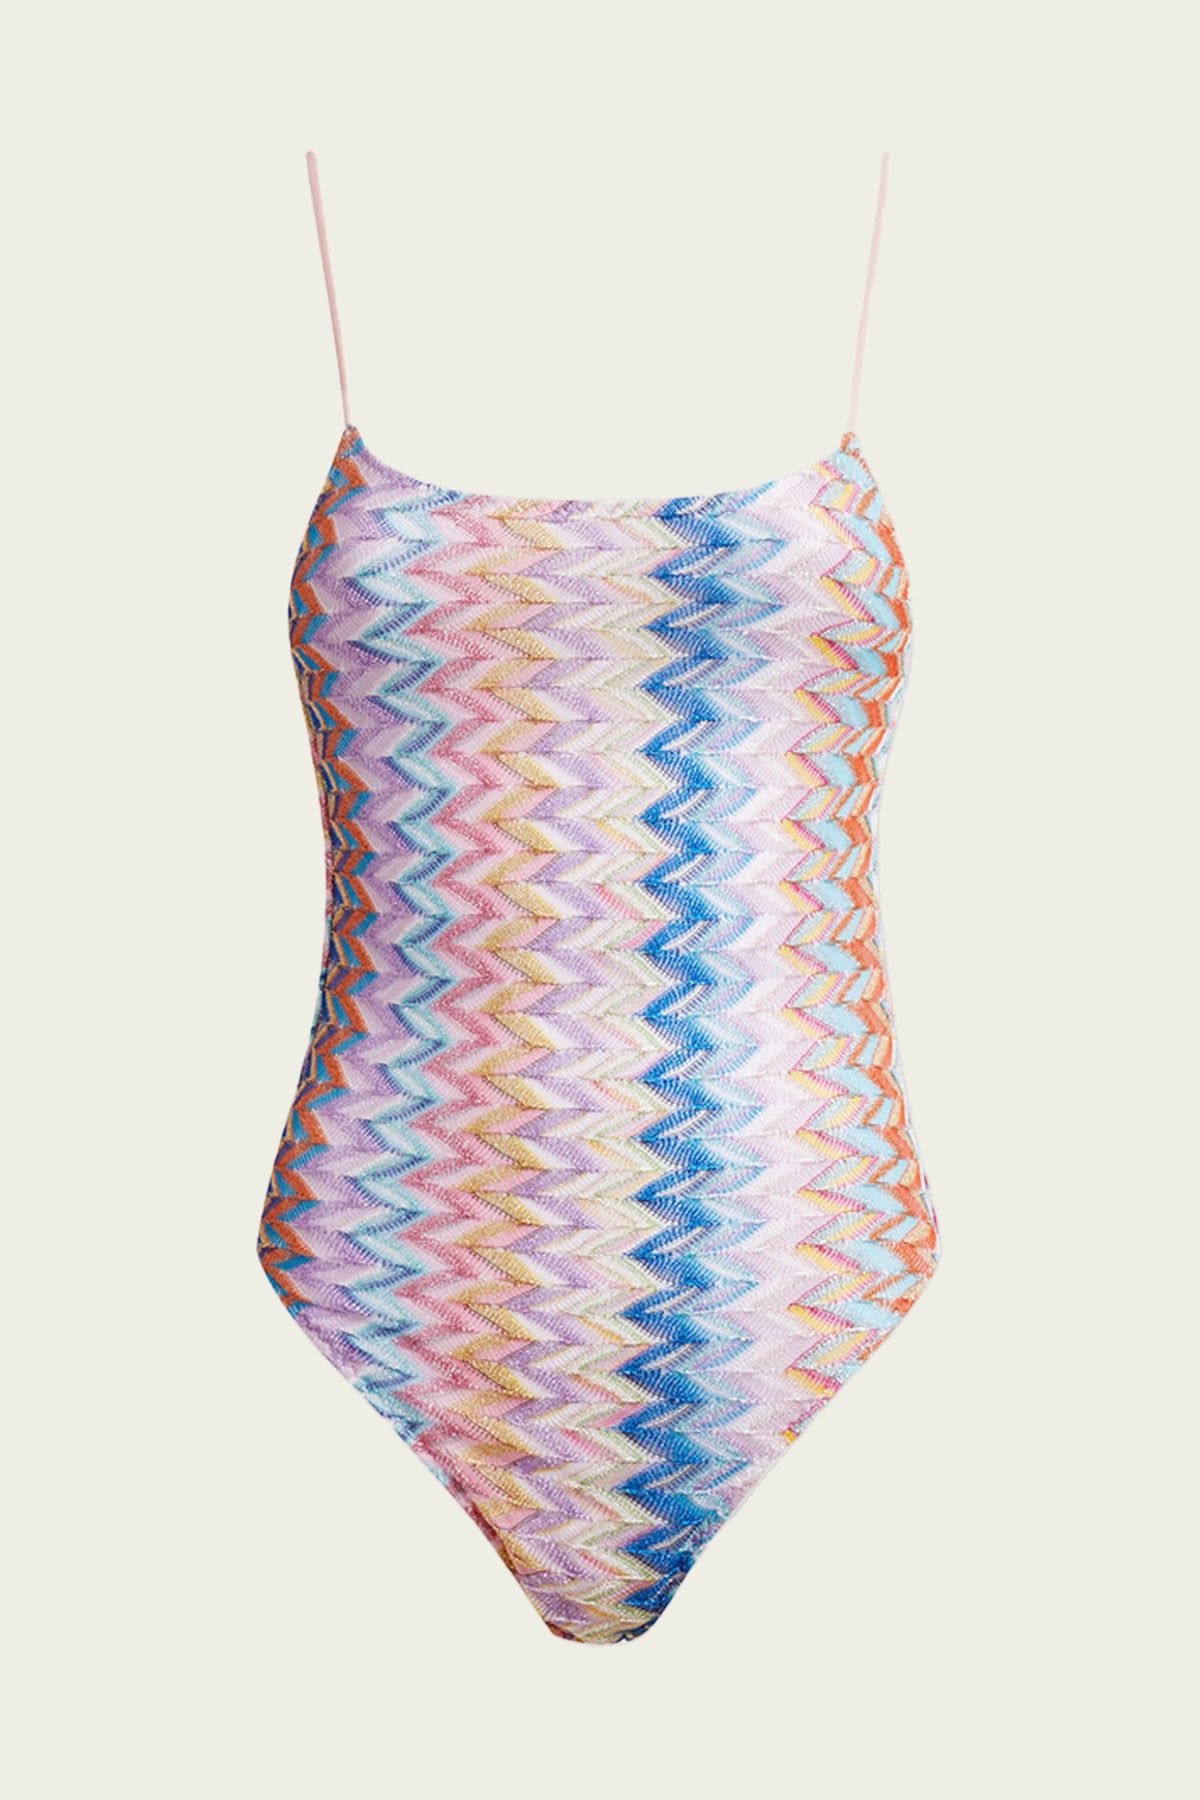 Chevron Lamé One Piece in Multicolor with Space Dyed - shop-olivia.com